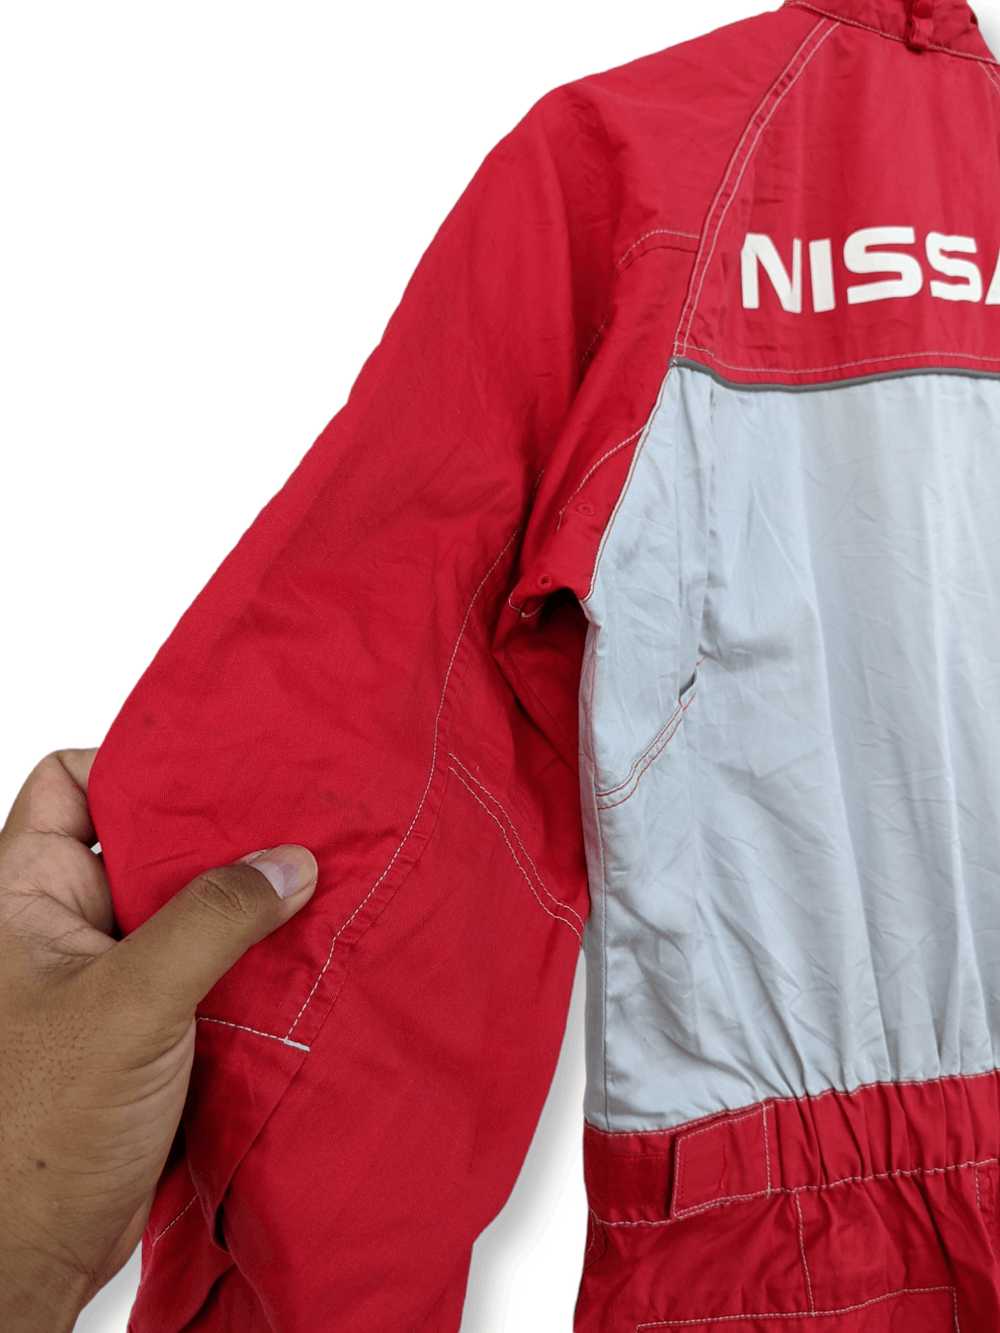 Gear For Sports × Racing Nissan Racing Worker Ove… - image 11